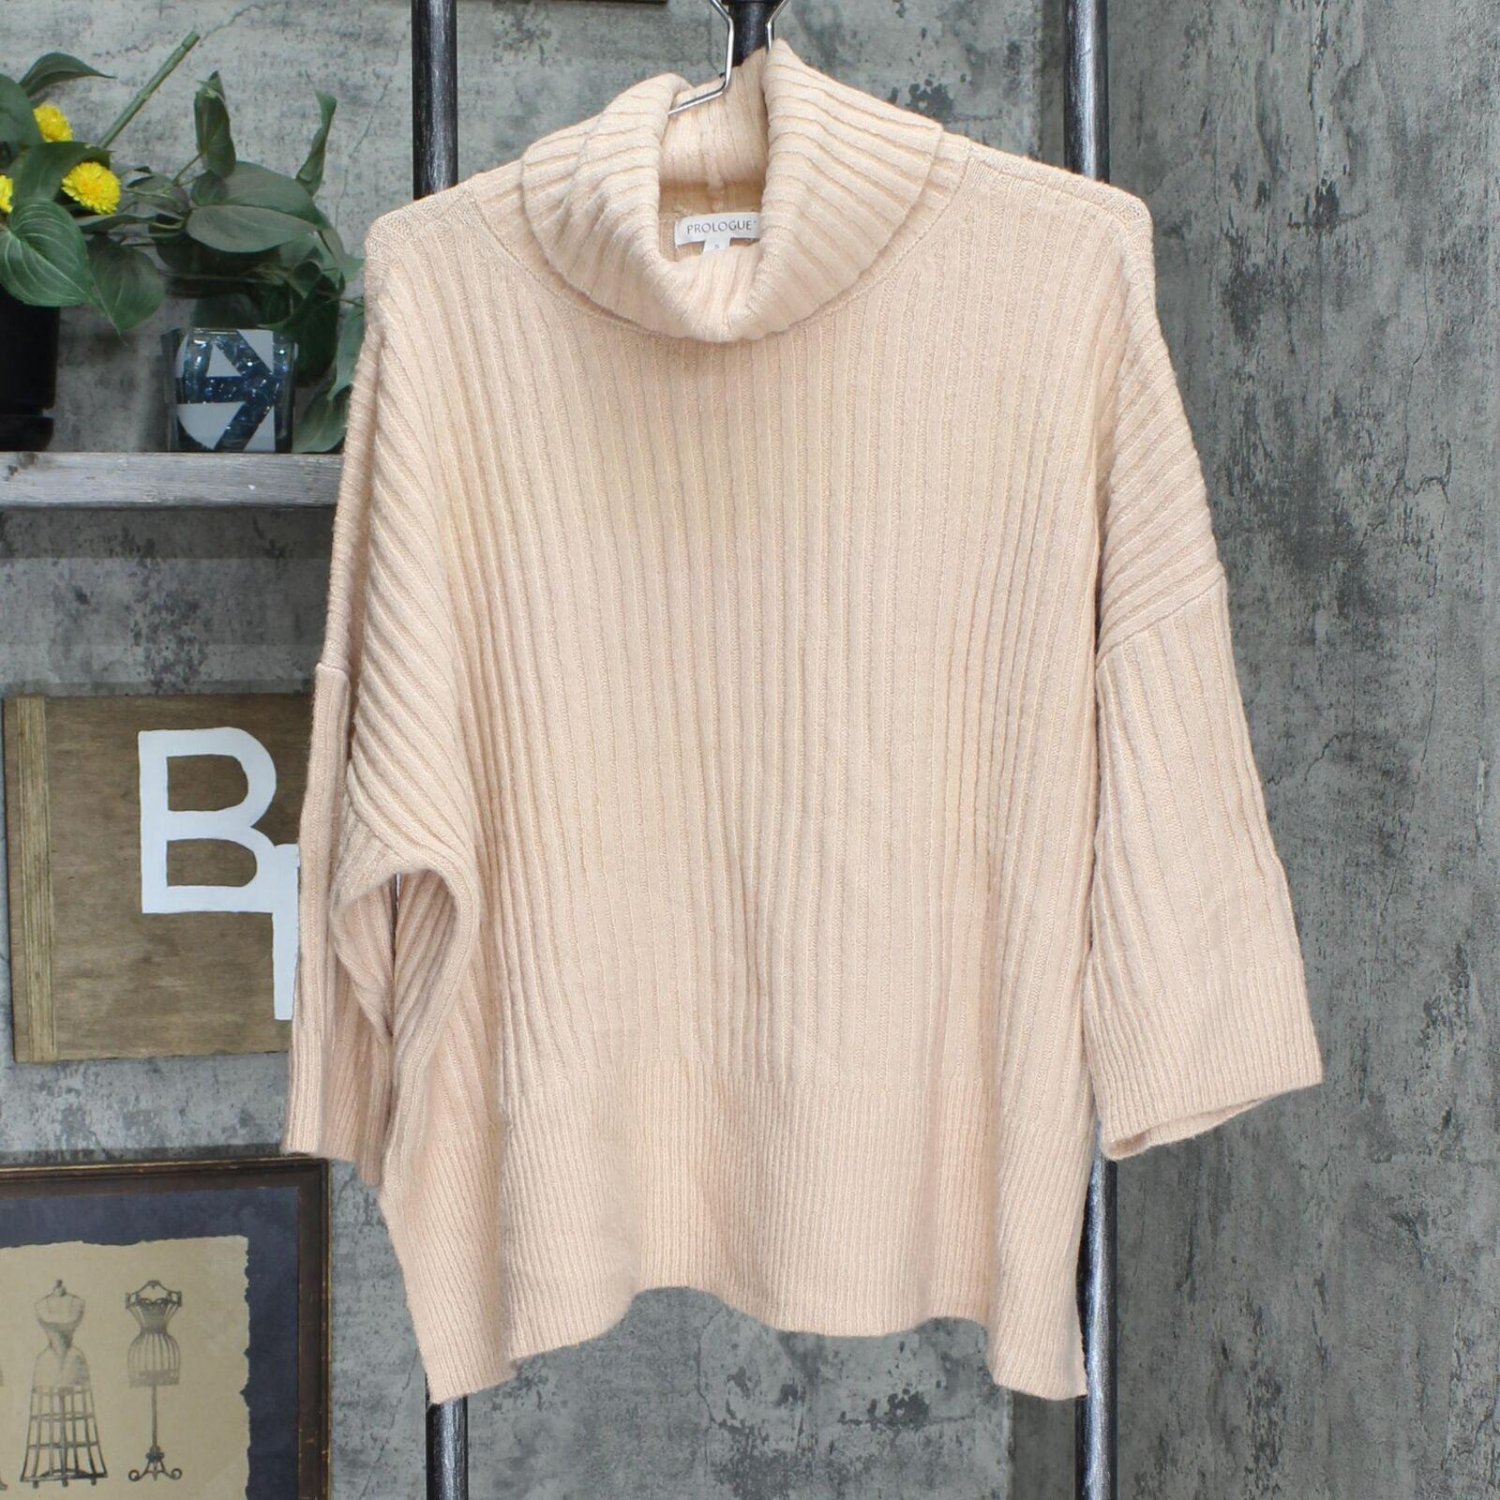 Prologue Women's 3/4 Sleeve Turtleneck Pullover Sweater Blush Pink S